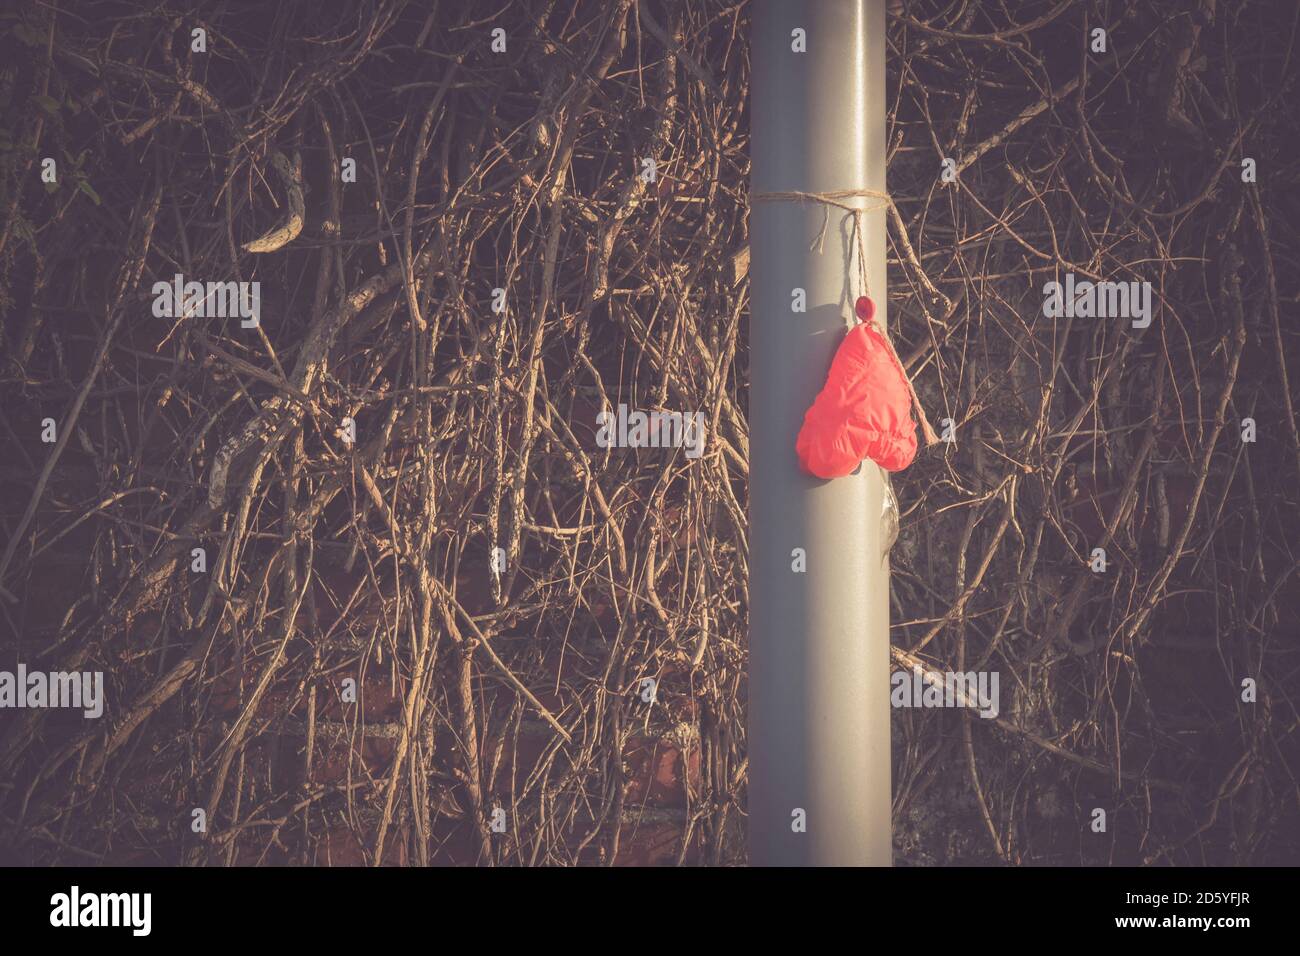 Deflated heart-shaped balloon hanging on a pole Stock Photo